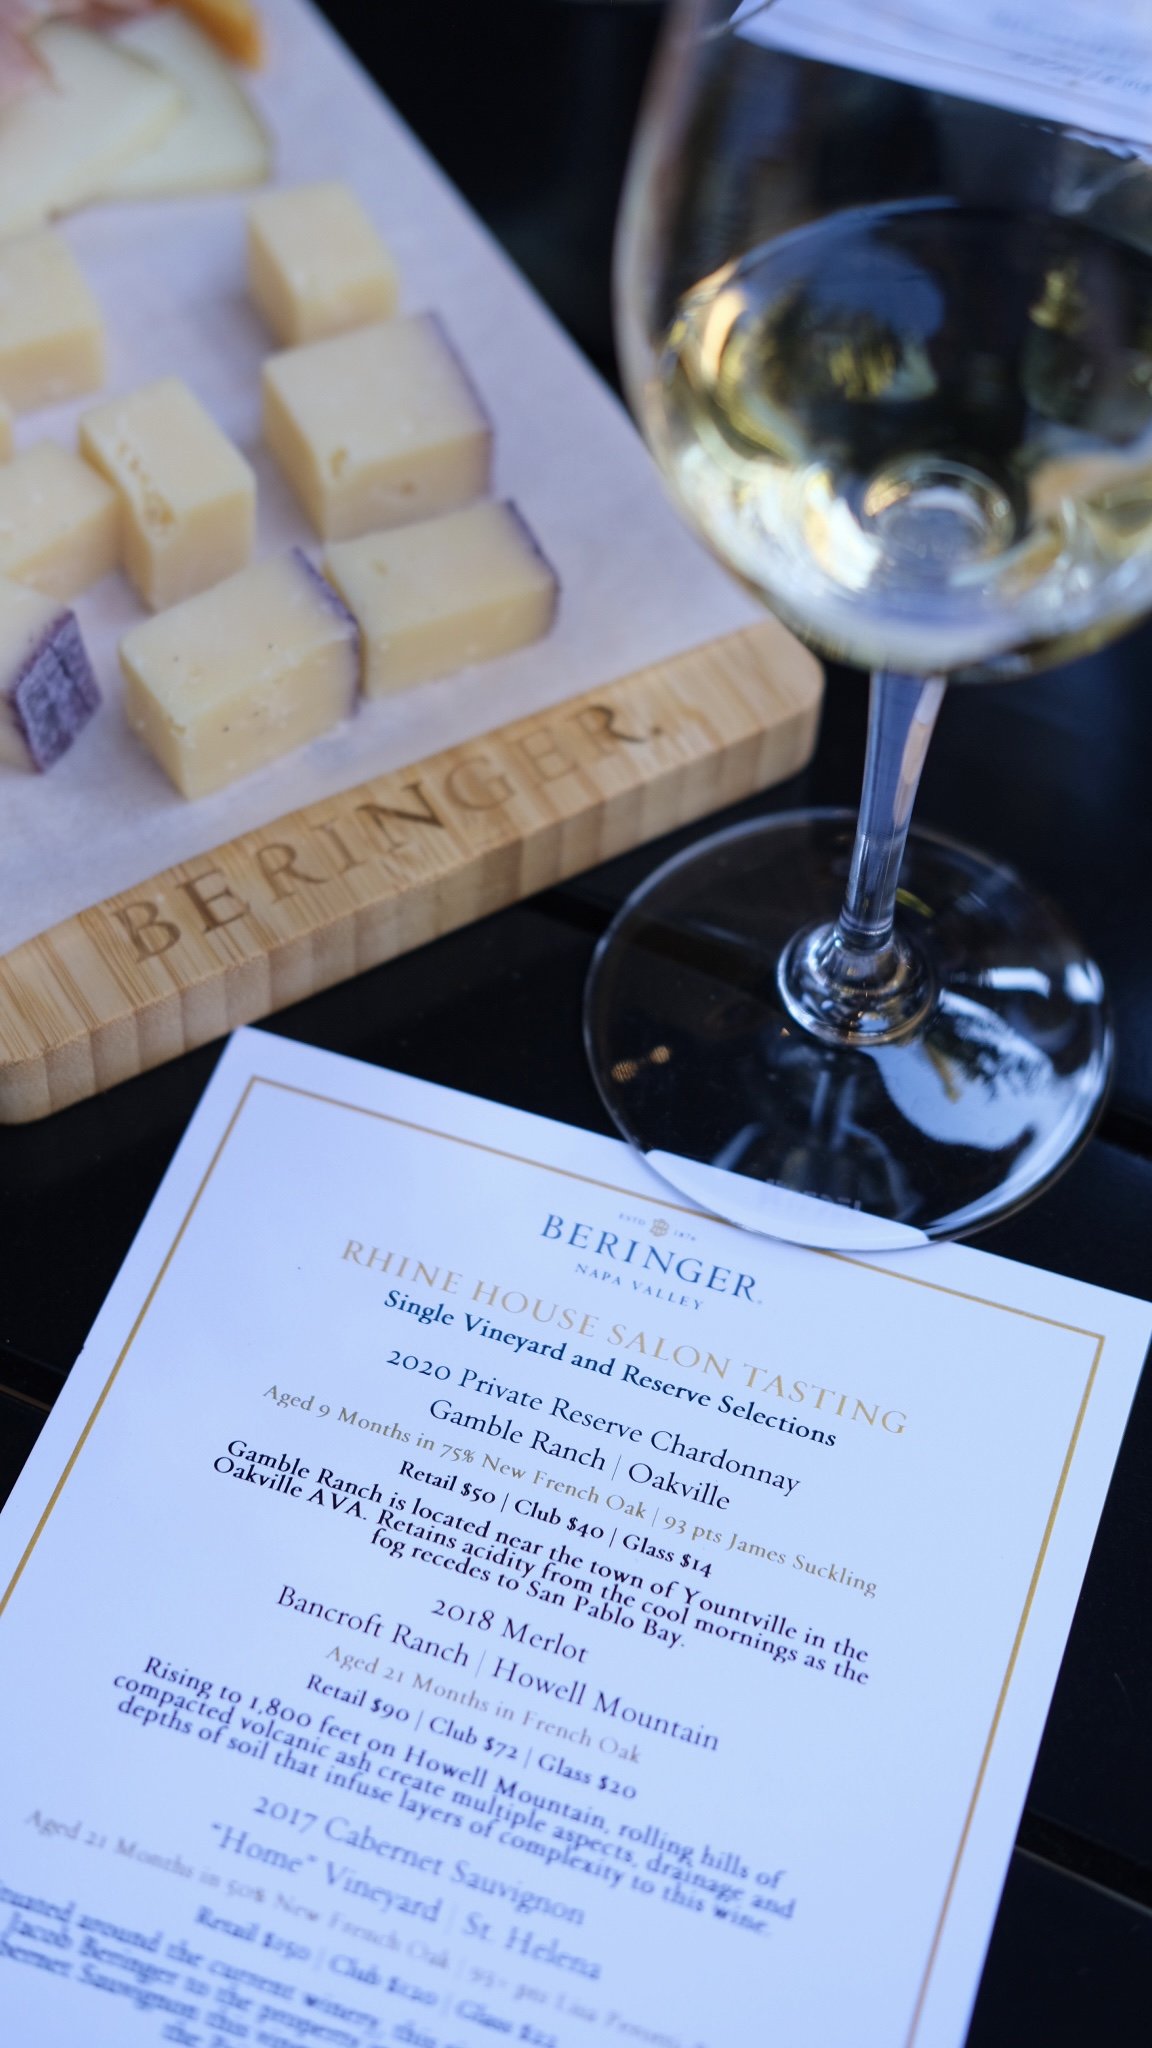 In this Beringer Vineyards review, I’ll tell you everything you need to know before you visit this historic Napa Valley winery.